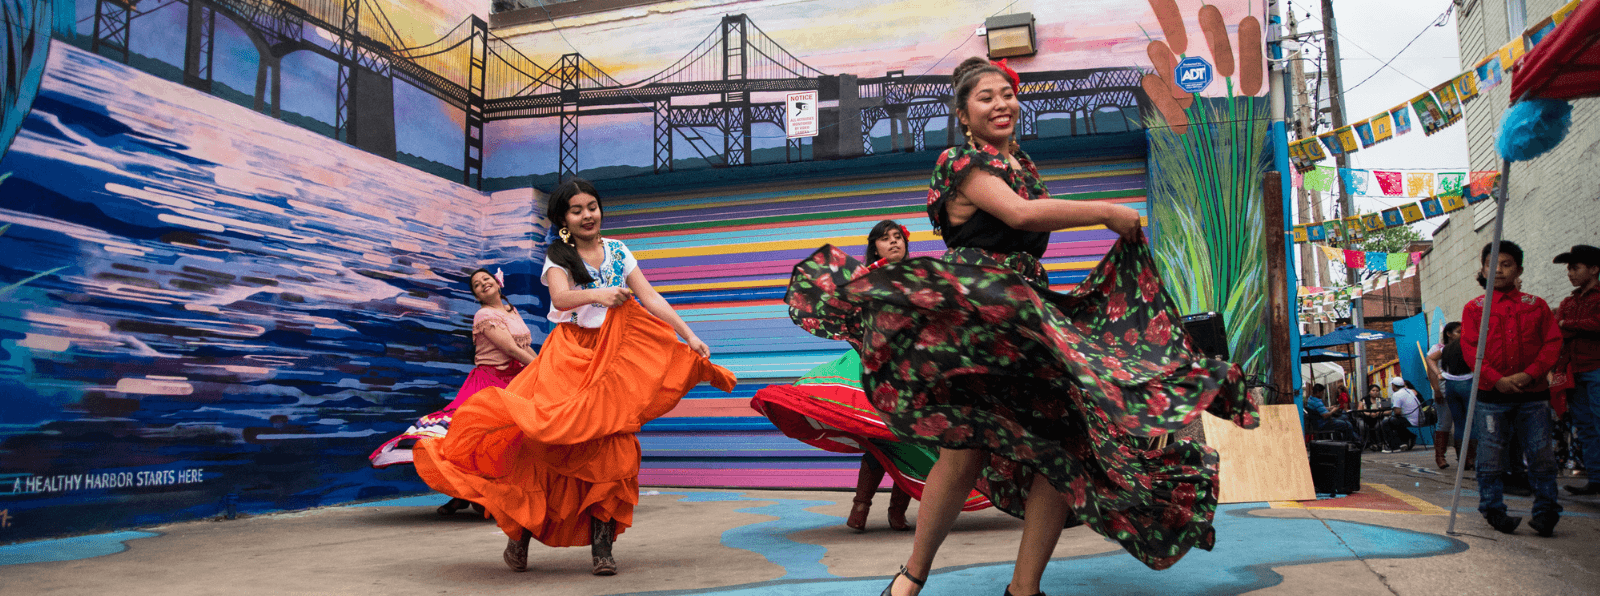 Four dancers in front of an outdoor mural